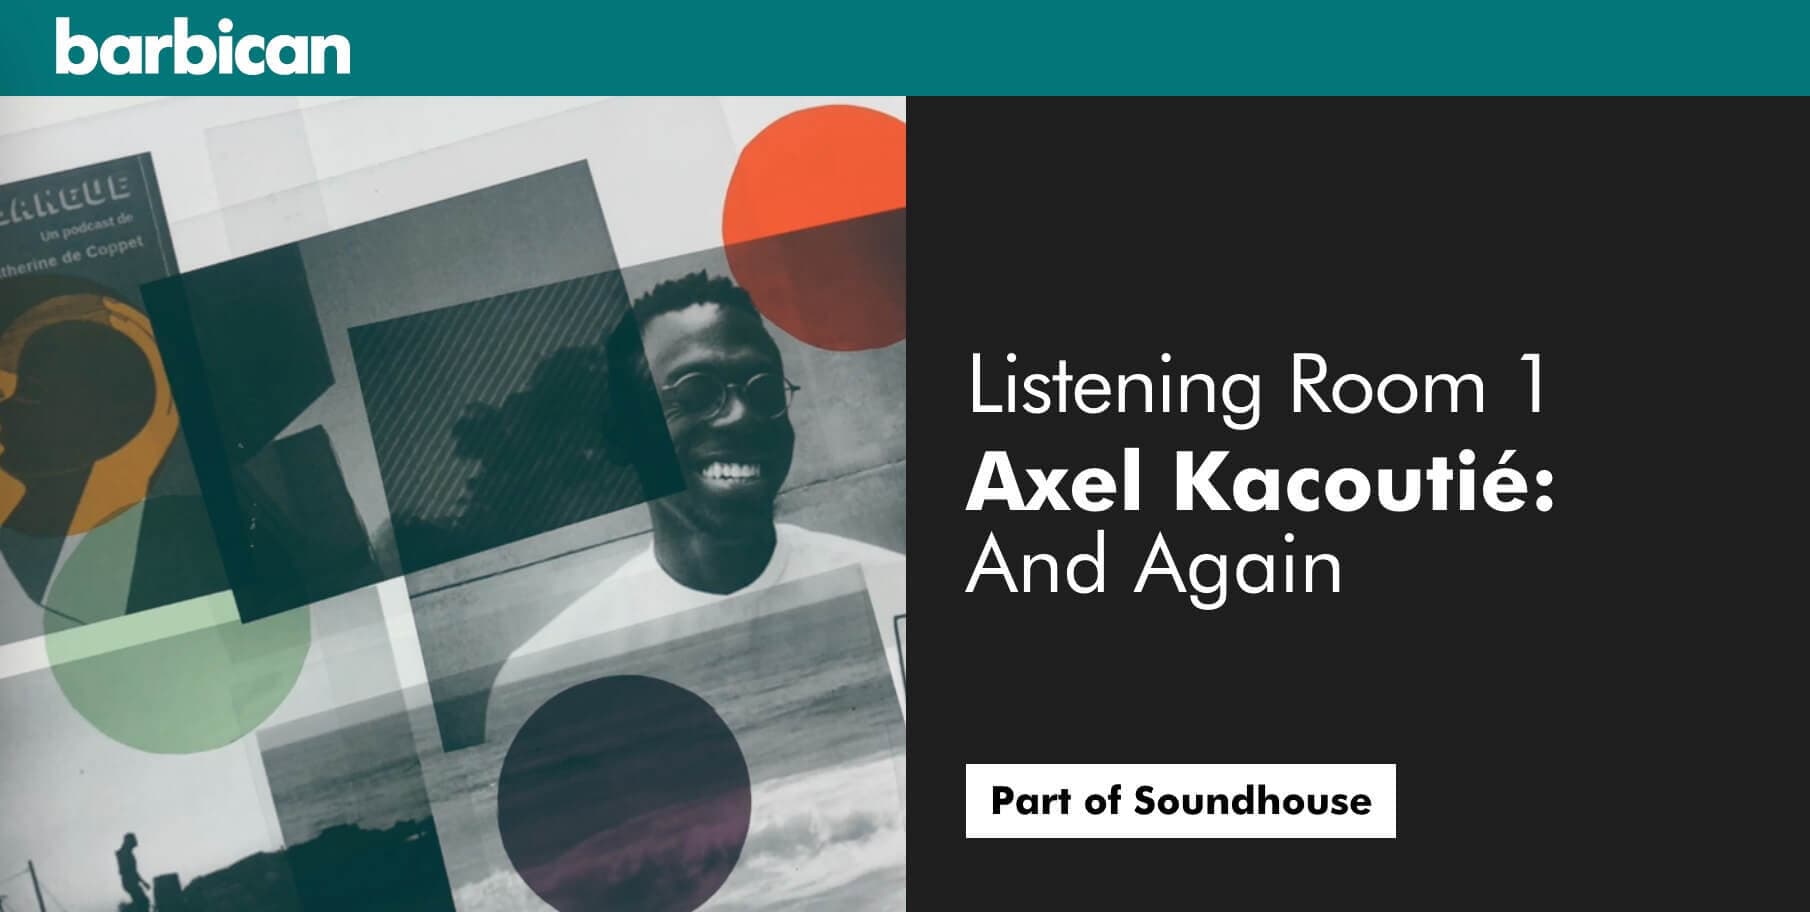 Barbican Soundhouse listening room 1: Axel